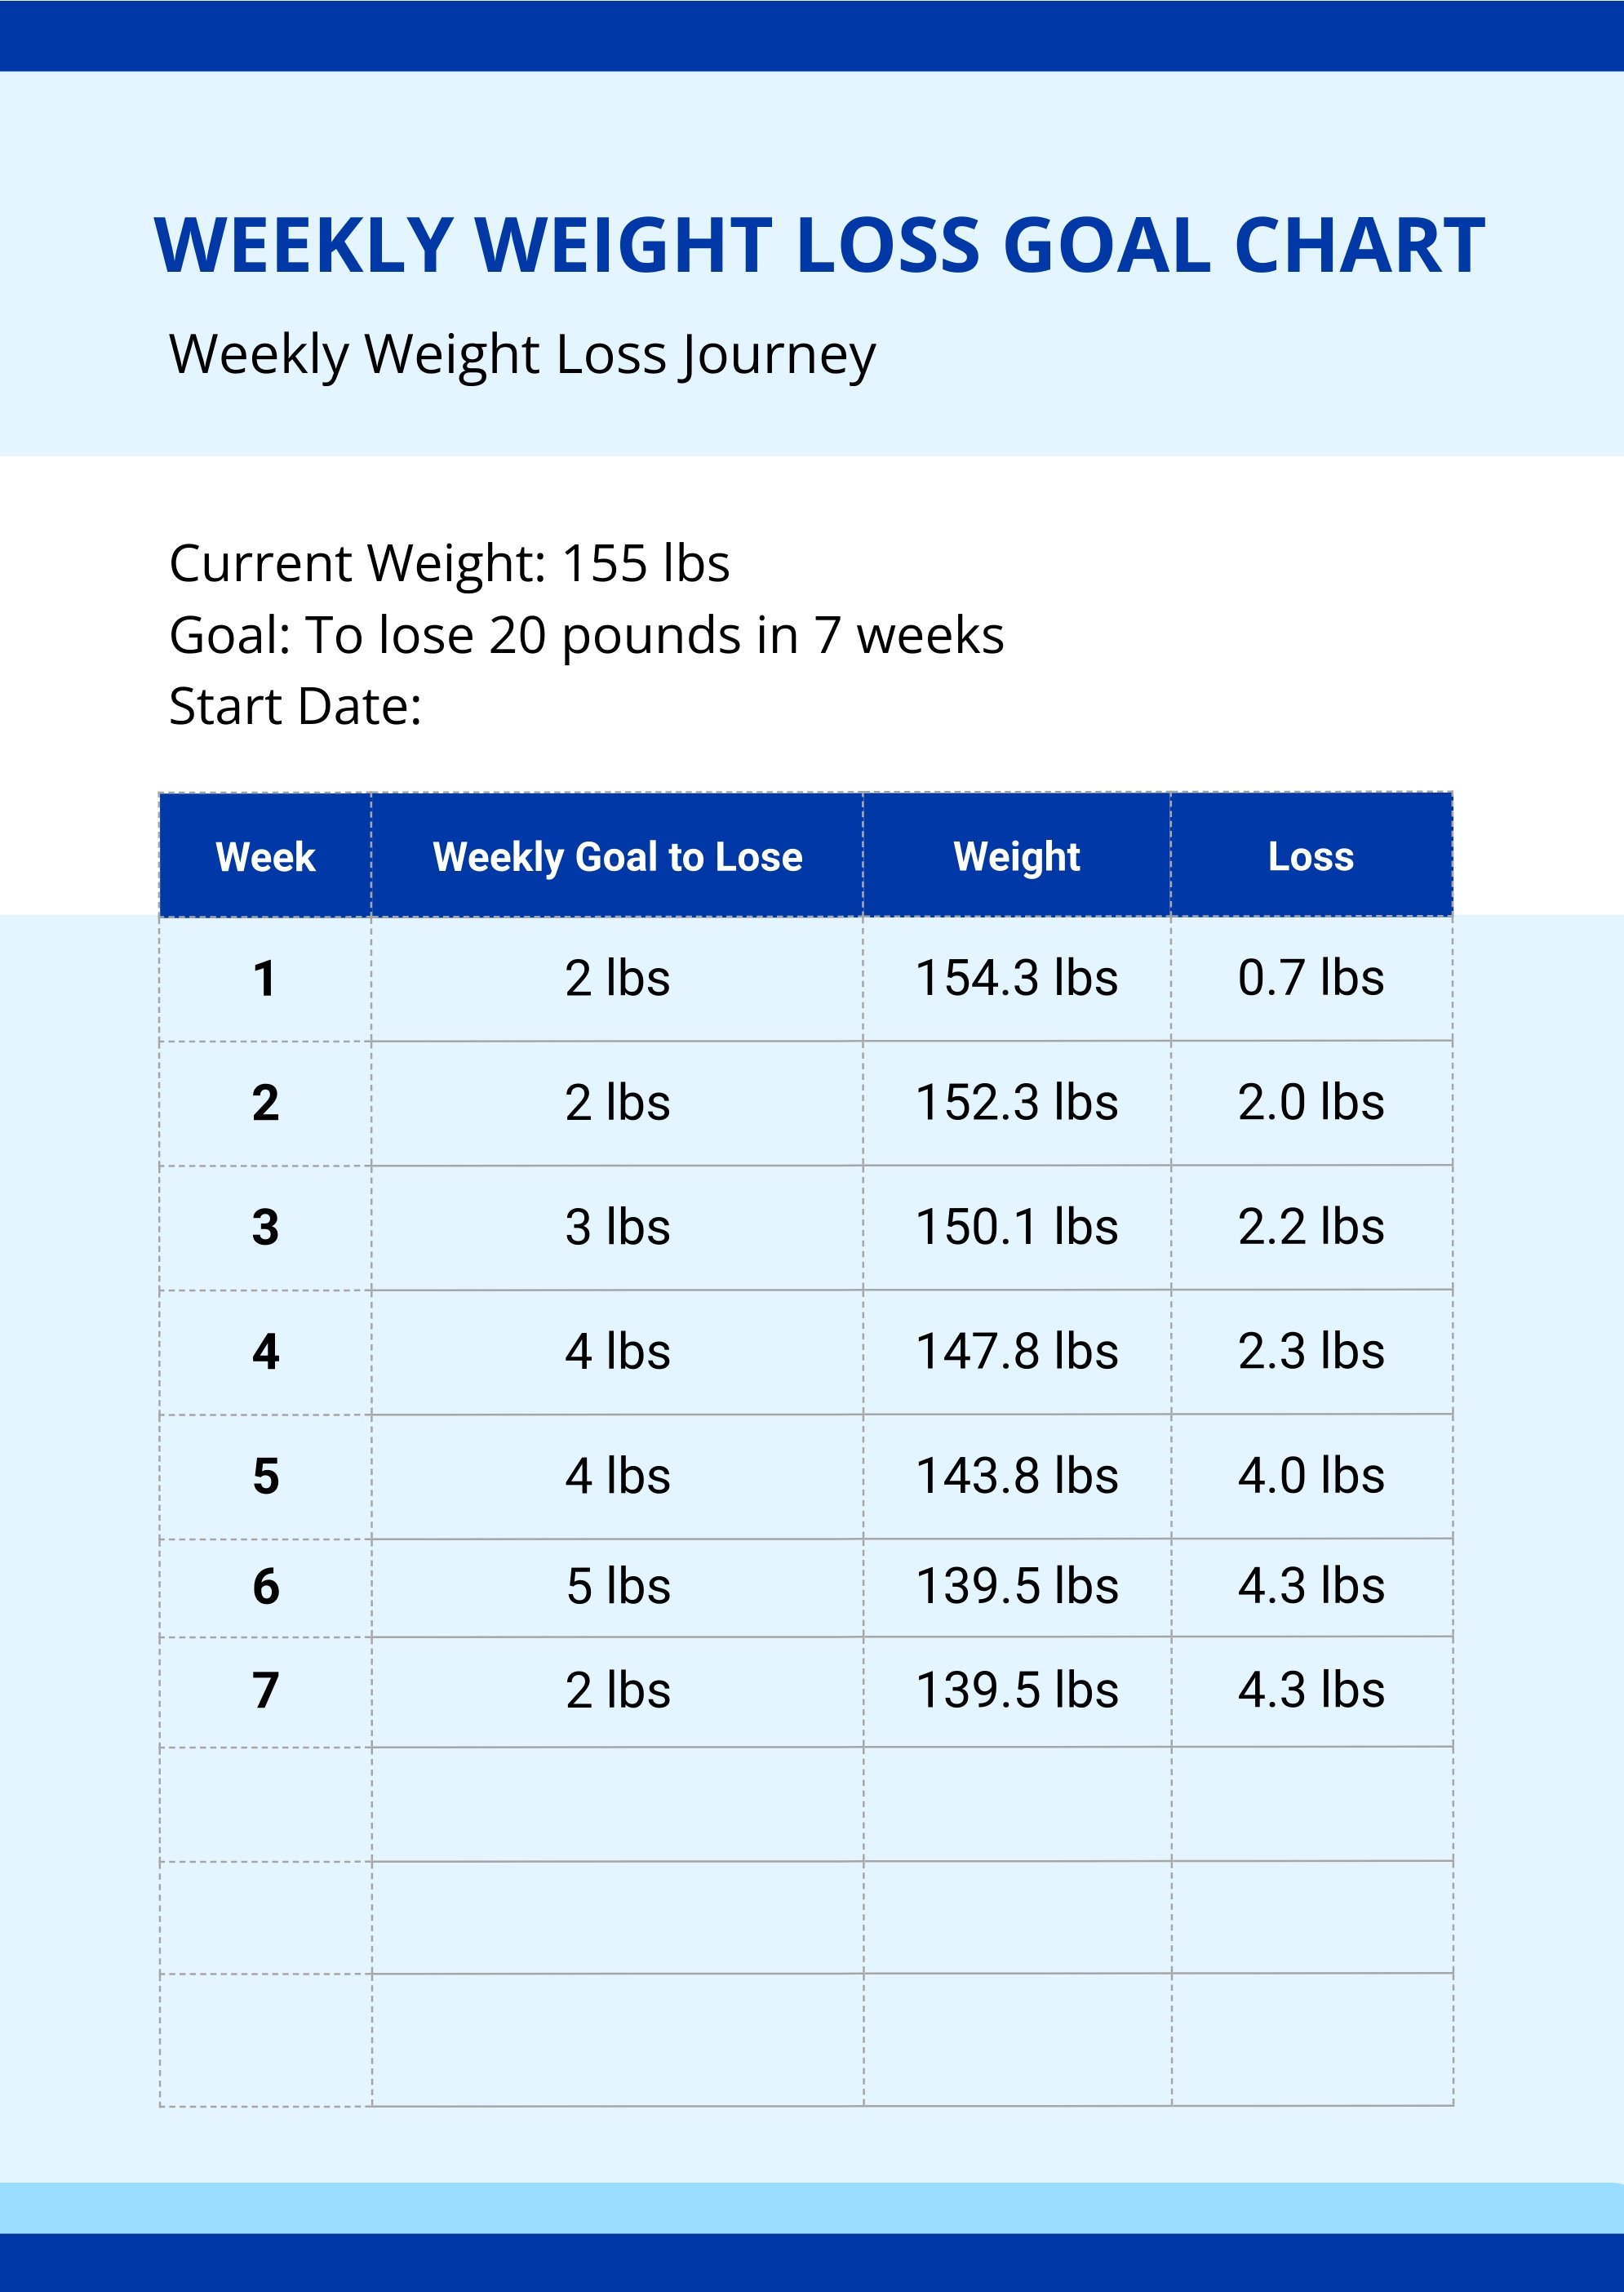 Weekly Weight Loss Goal Chart in Illustrator, PDF Download